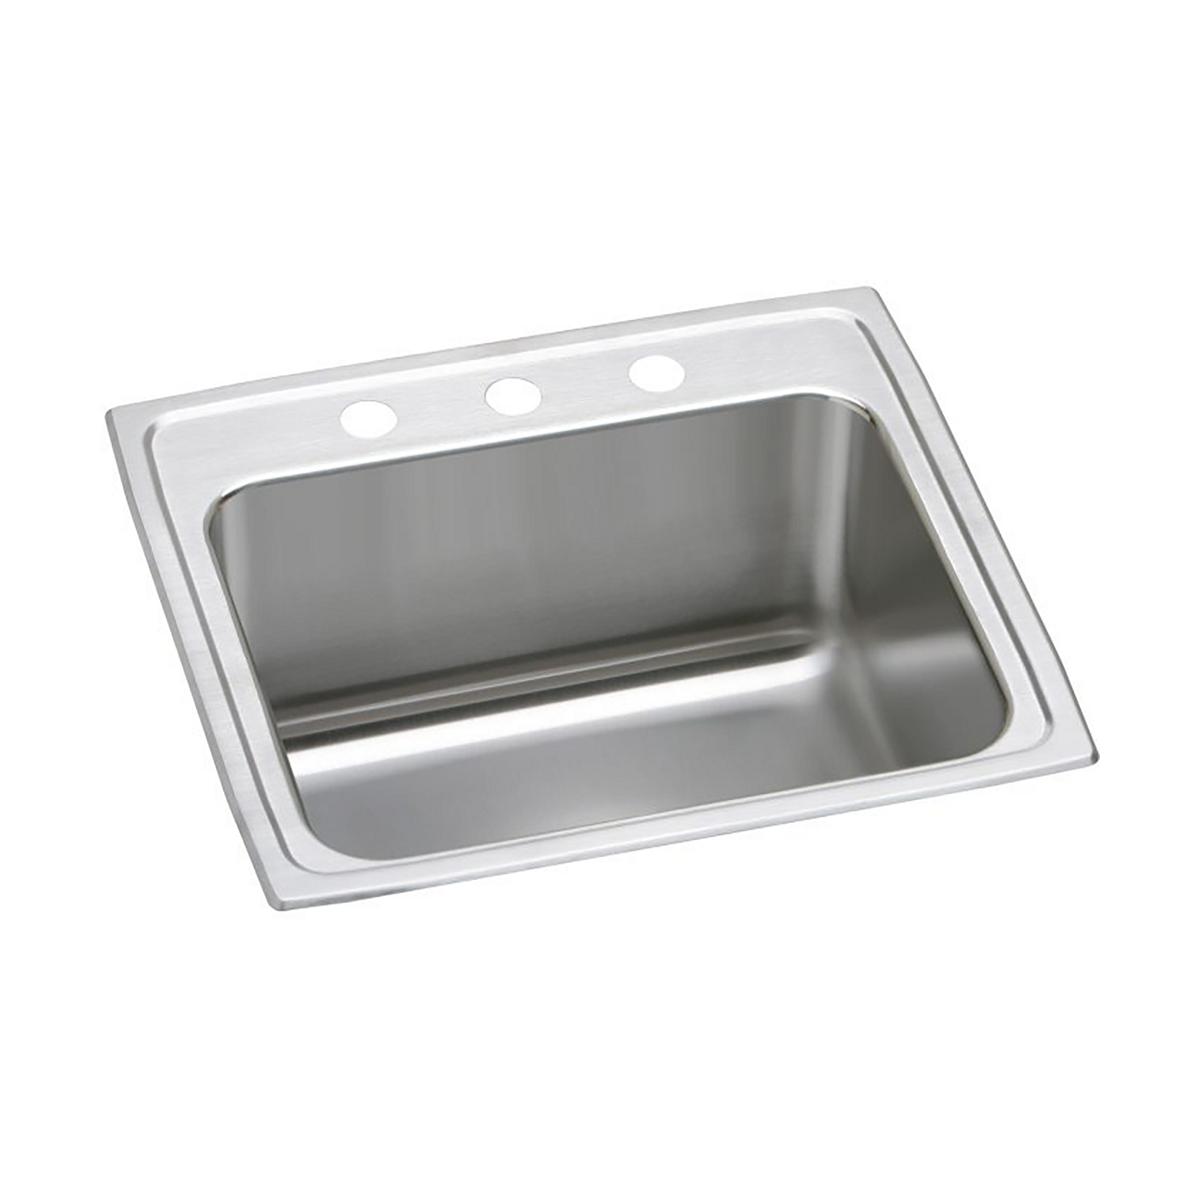 Elkay Lustertone Classic 25" x 21-1/4" x 10-1/8" MR2-Hole Single Bowl Drop-in Sink with Perfect Drain